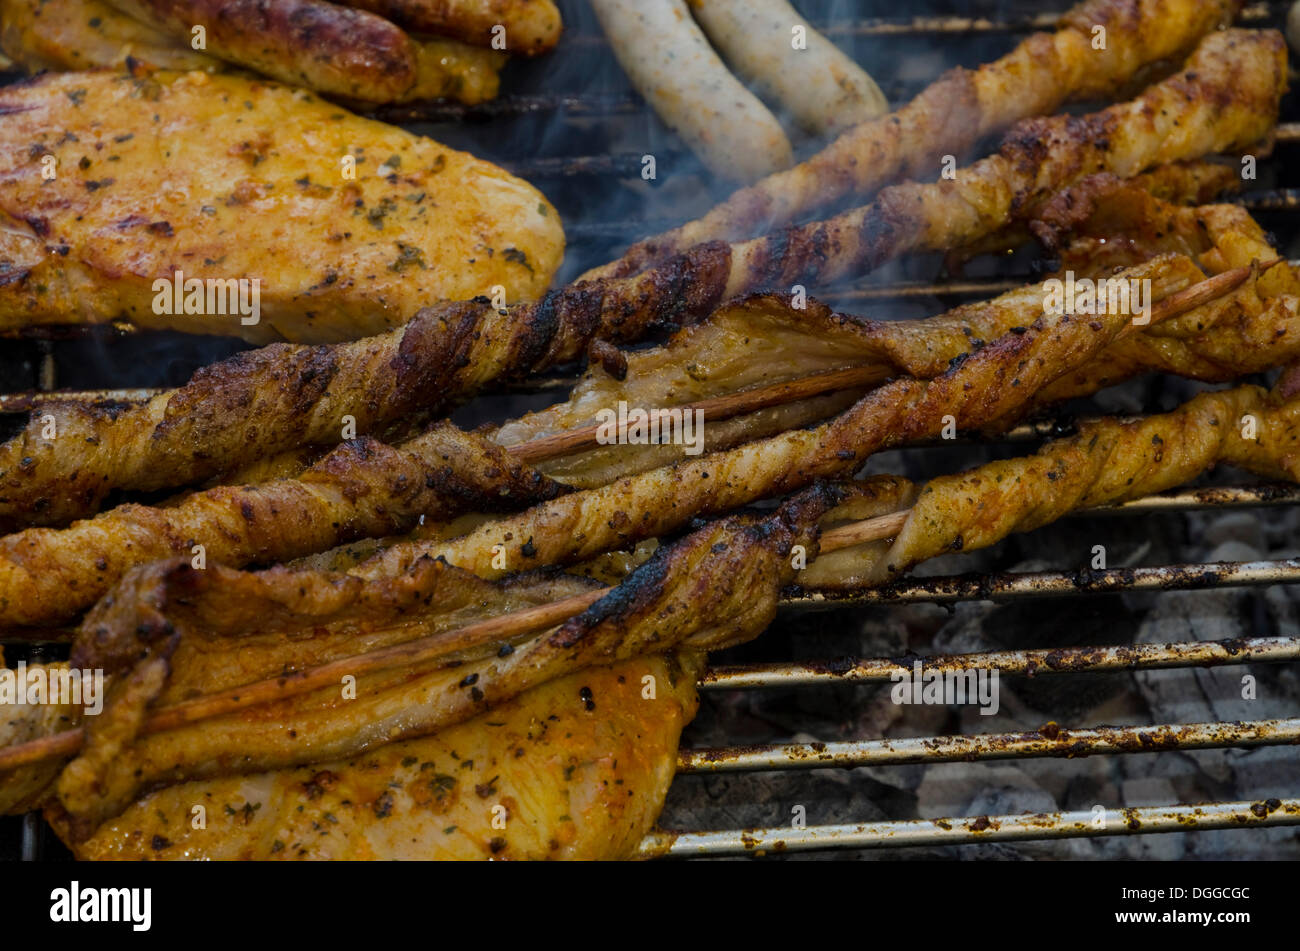 Grilled meat on a BBQ Stock Photo